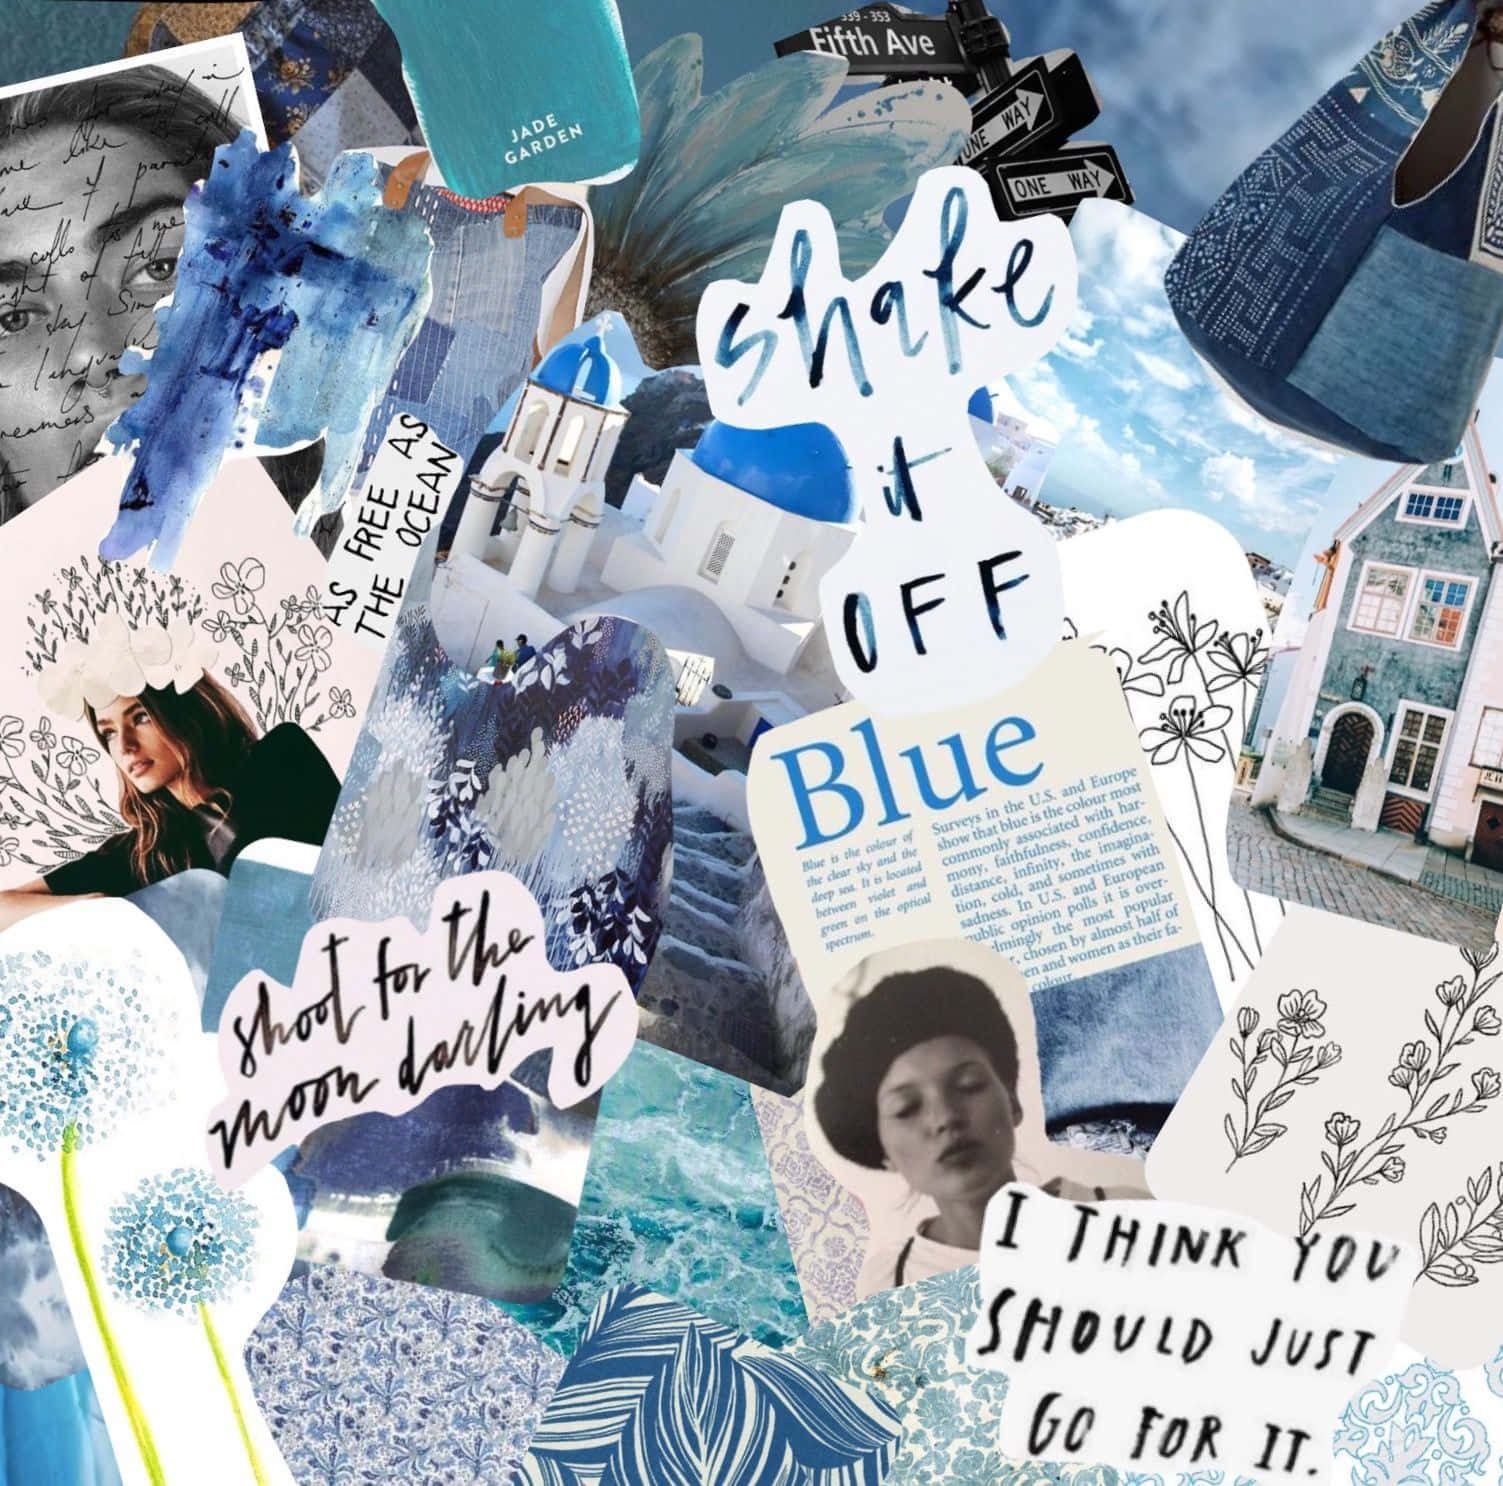 Aesthetic Blue Collage Newspaper And Magazine Clippings Wallpaper